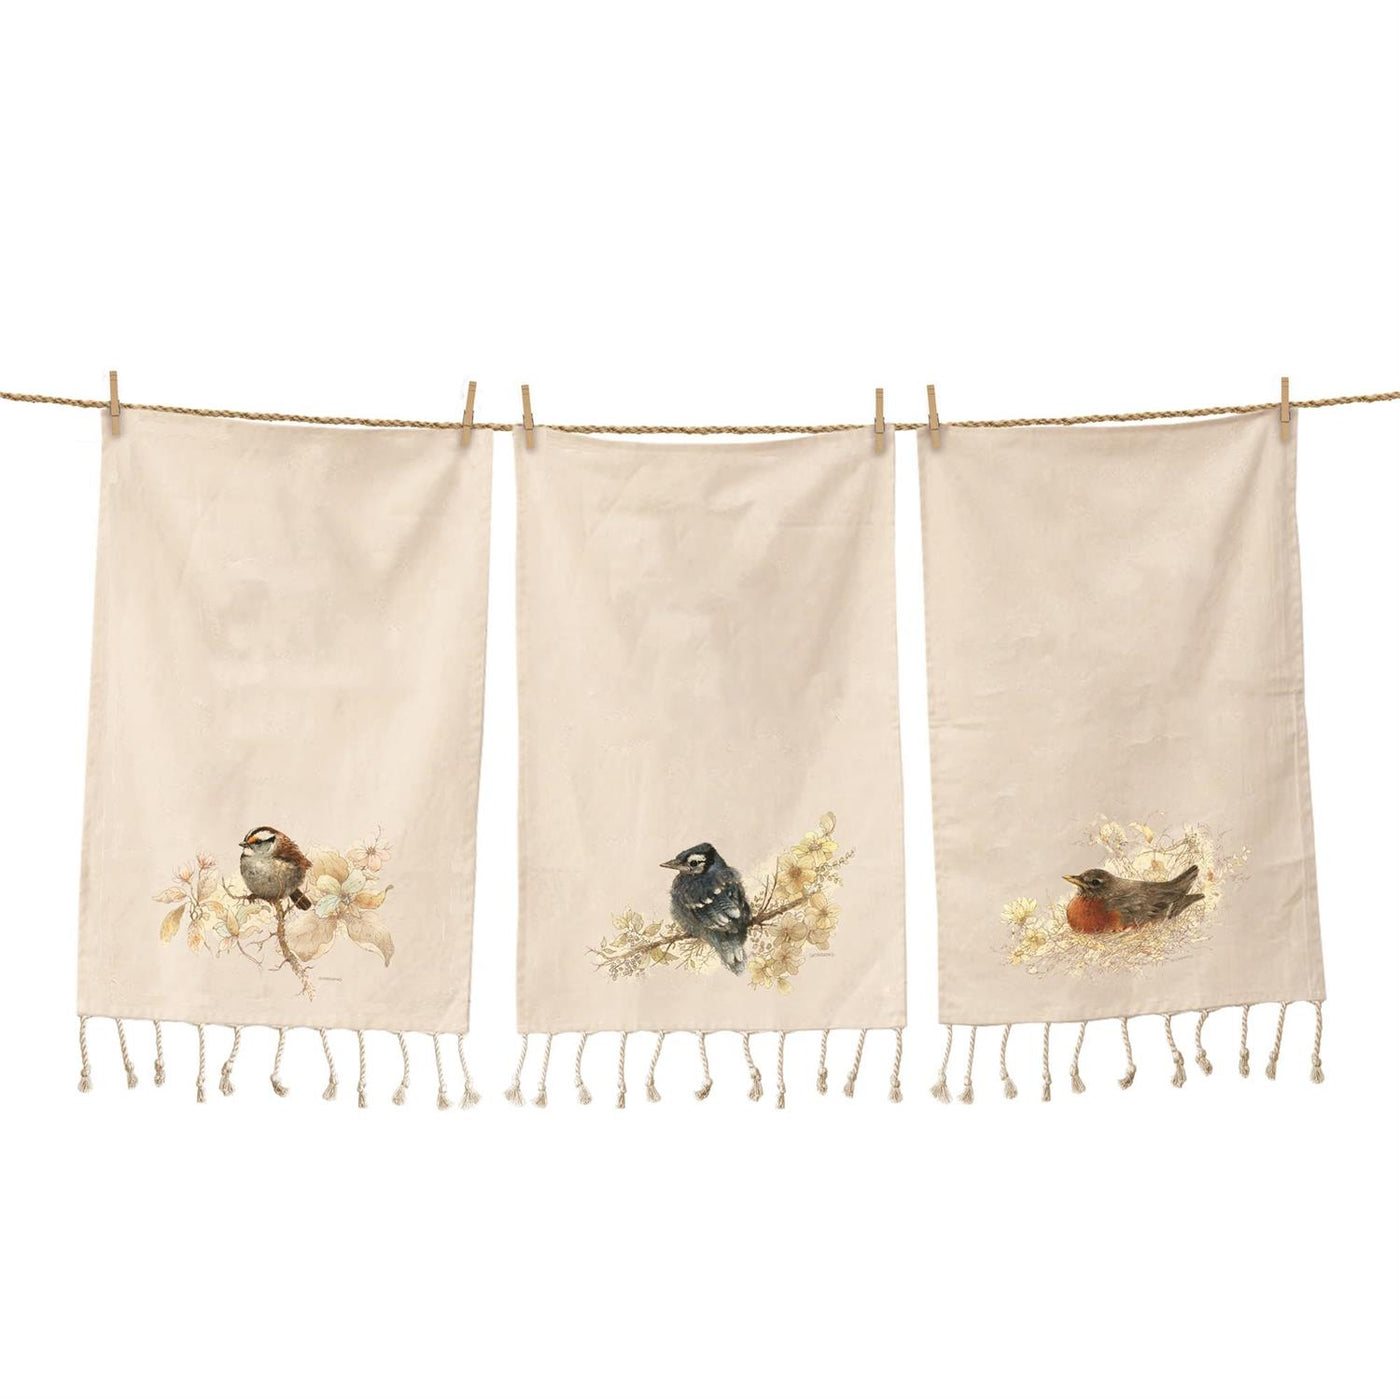 DAY 11 🐦 14 DAYS OF FEATHERED FRIENDS 🪺 Set of 3 Cozy Natural Birds in Nests Kitchen Towels